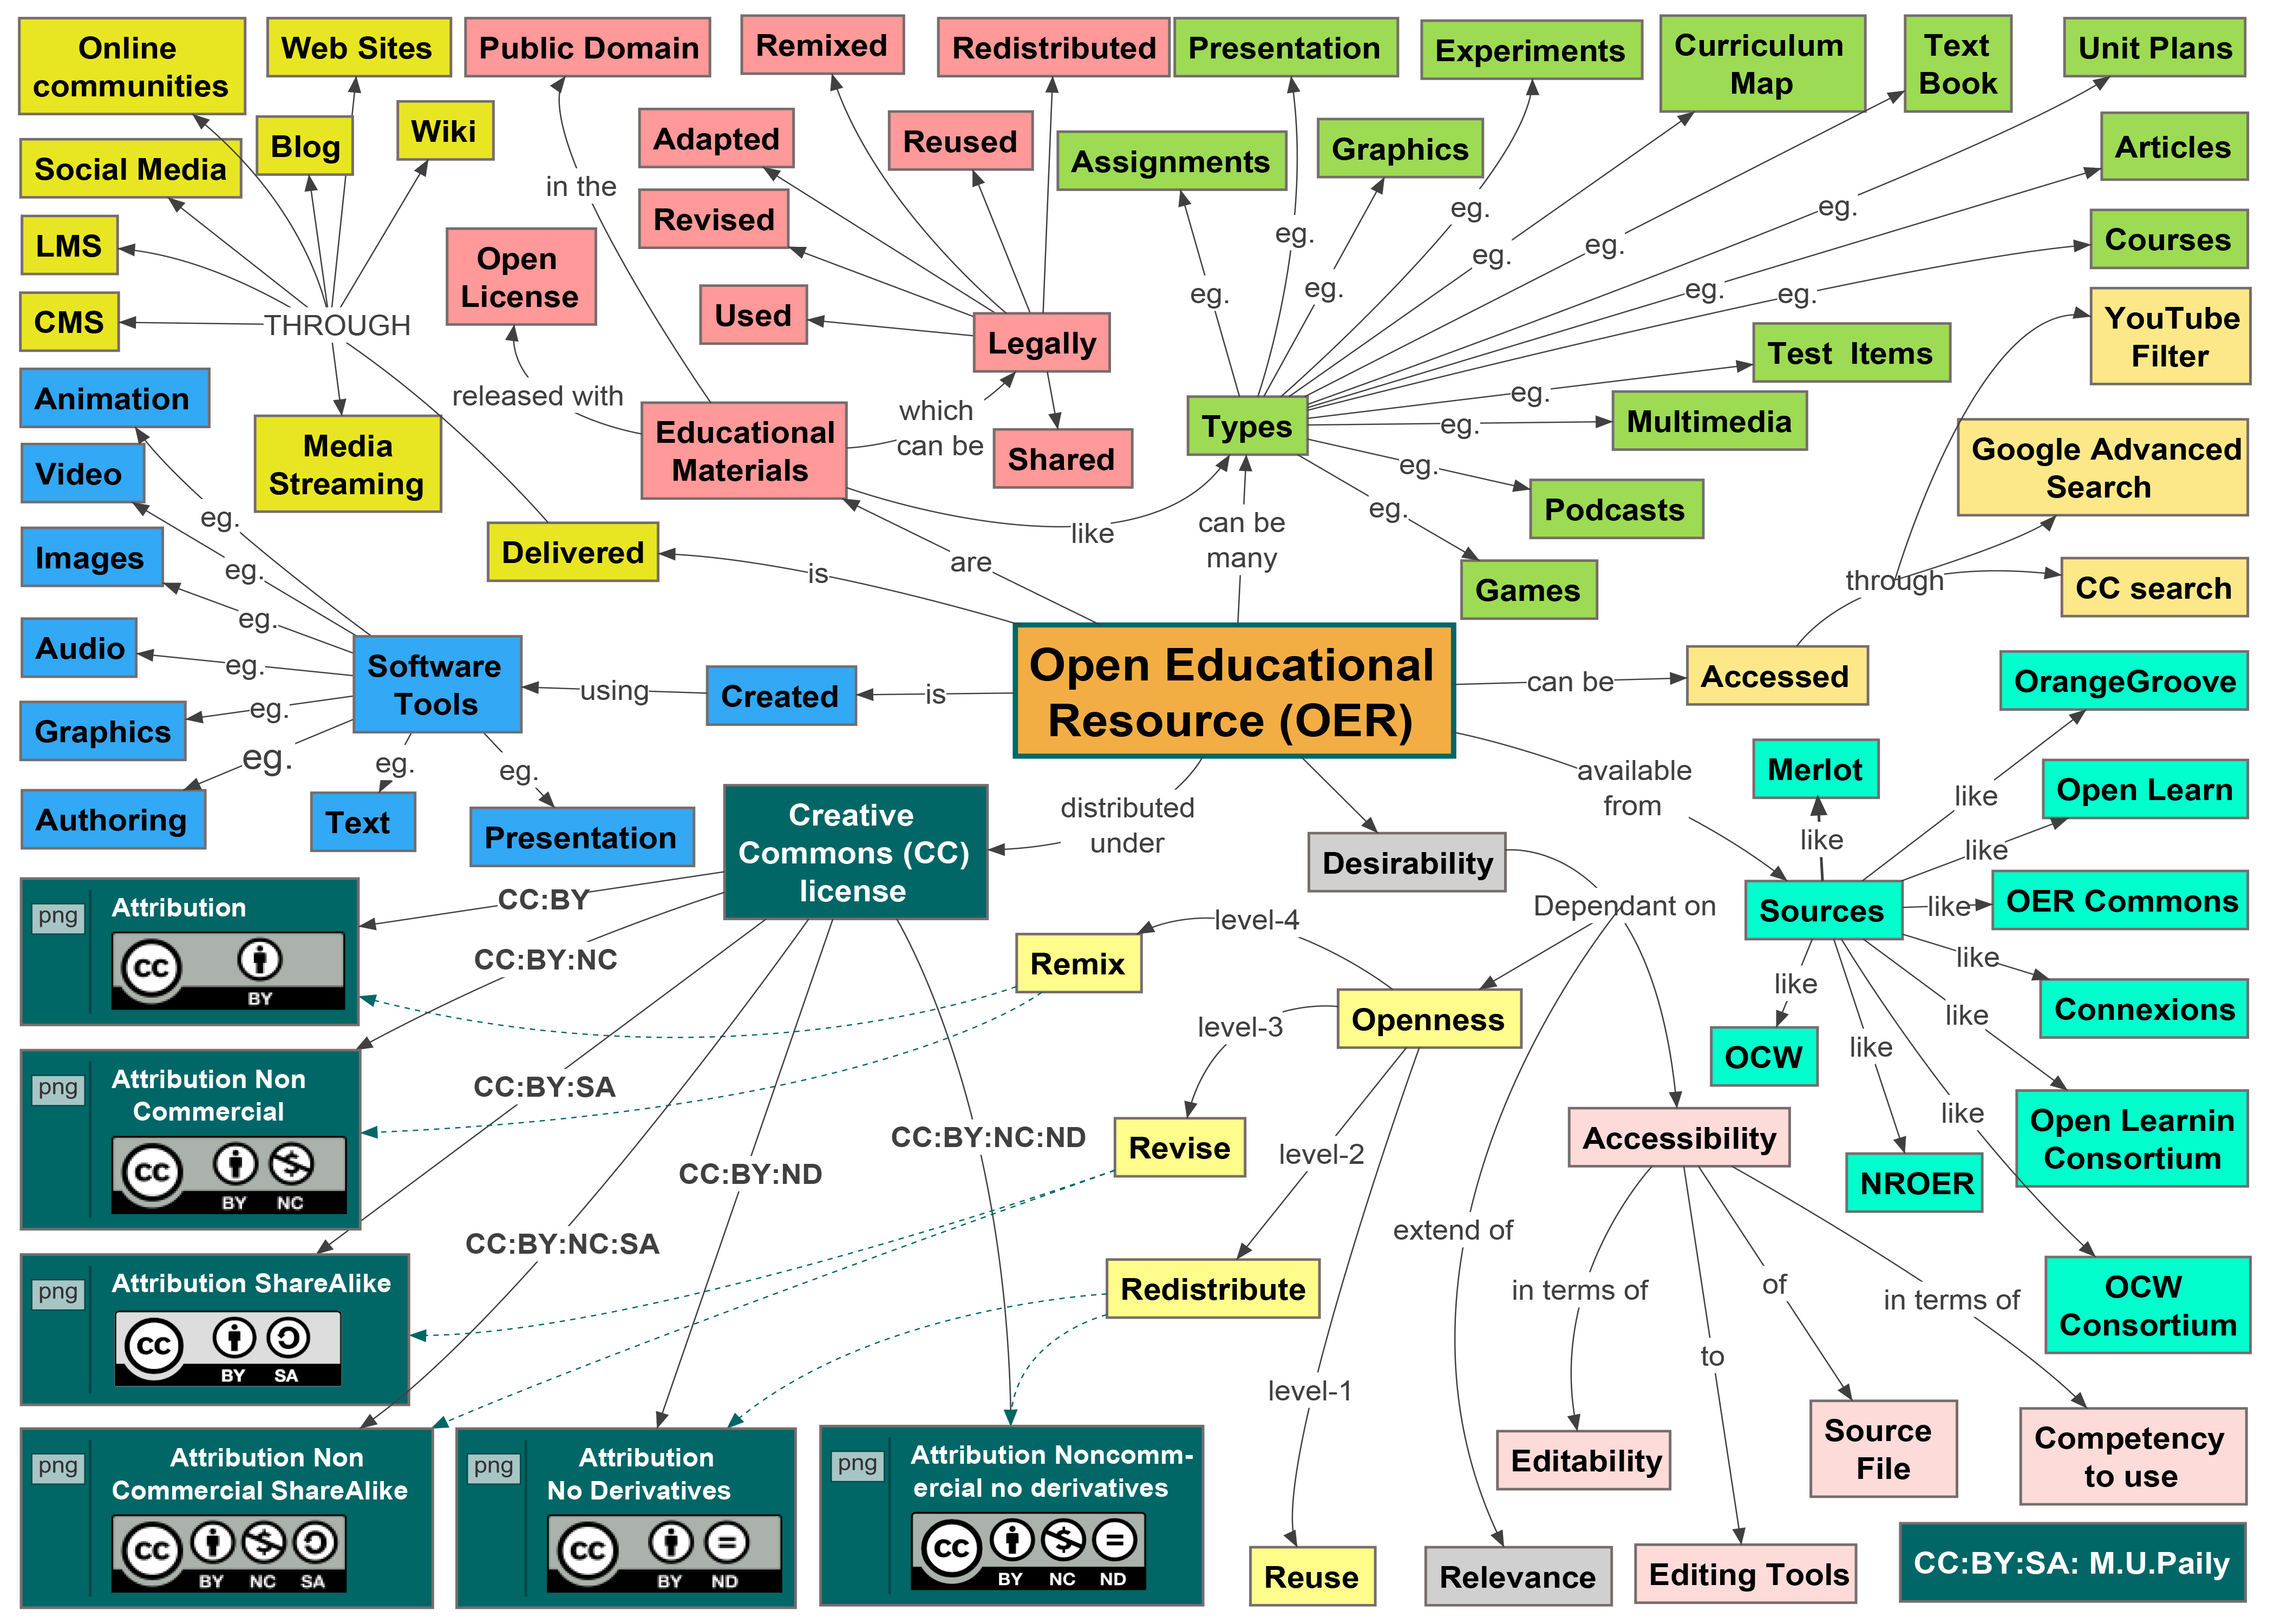 This Image is a Concept Map on Open educational Resources